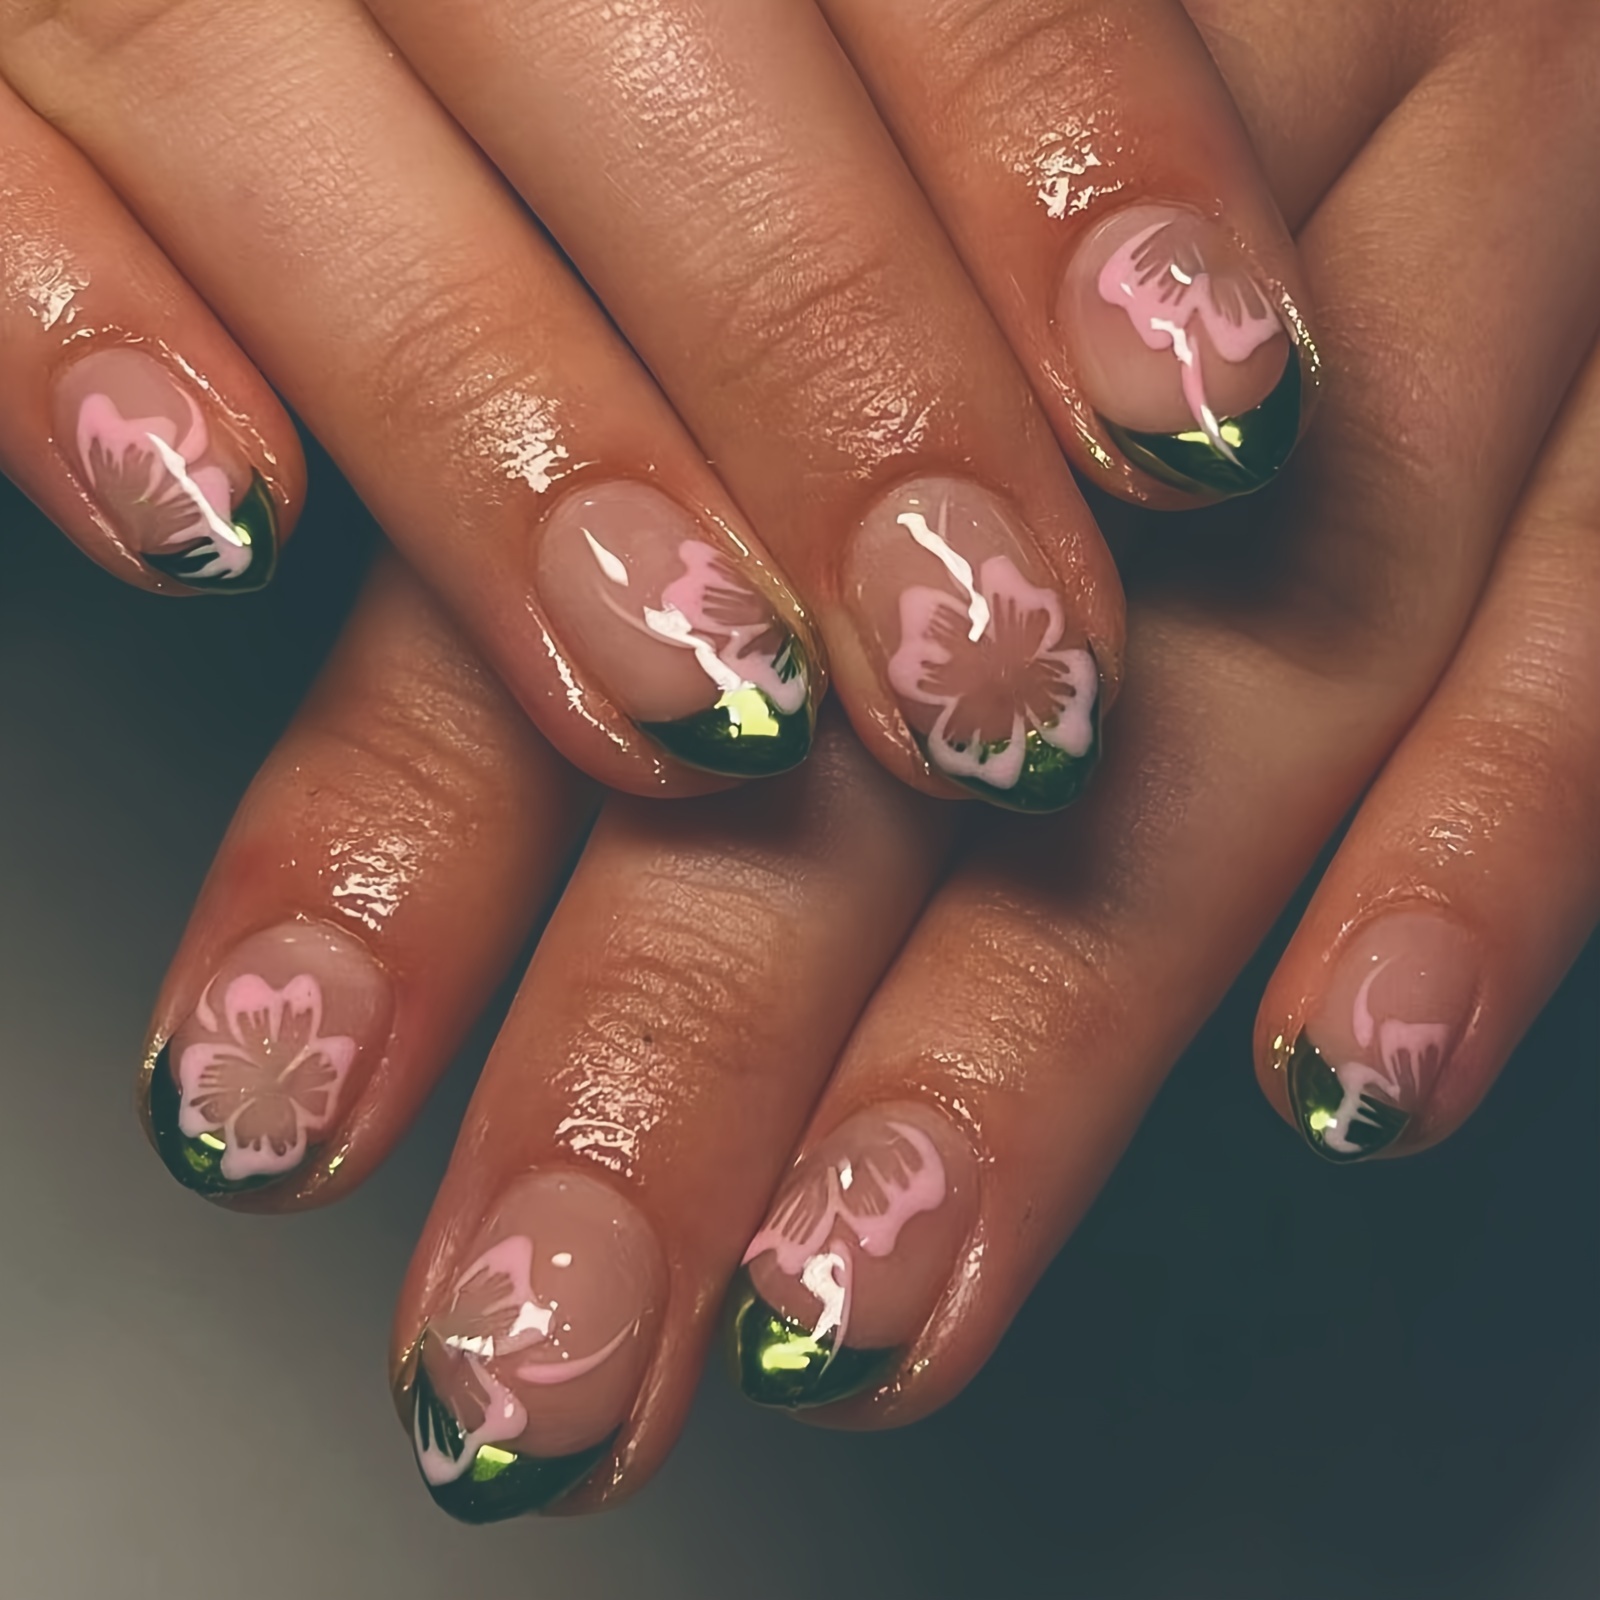 

24pcs Short Oval Press-on Nails, French Tip With Glitter Green Accents, Spring/summer Pink Floral Design, Pre-designed Fake Nail Set, Easy Application